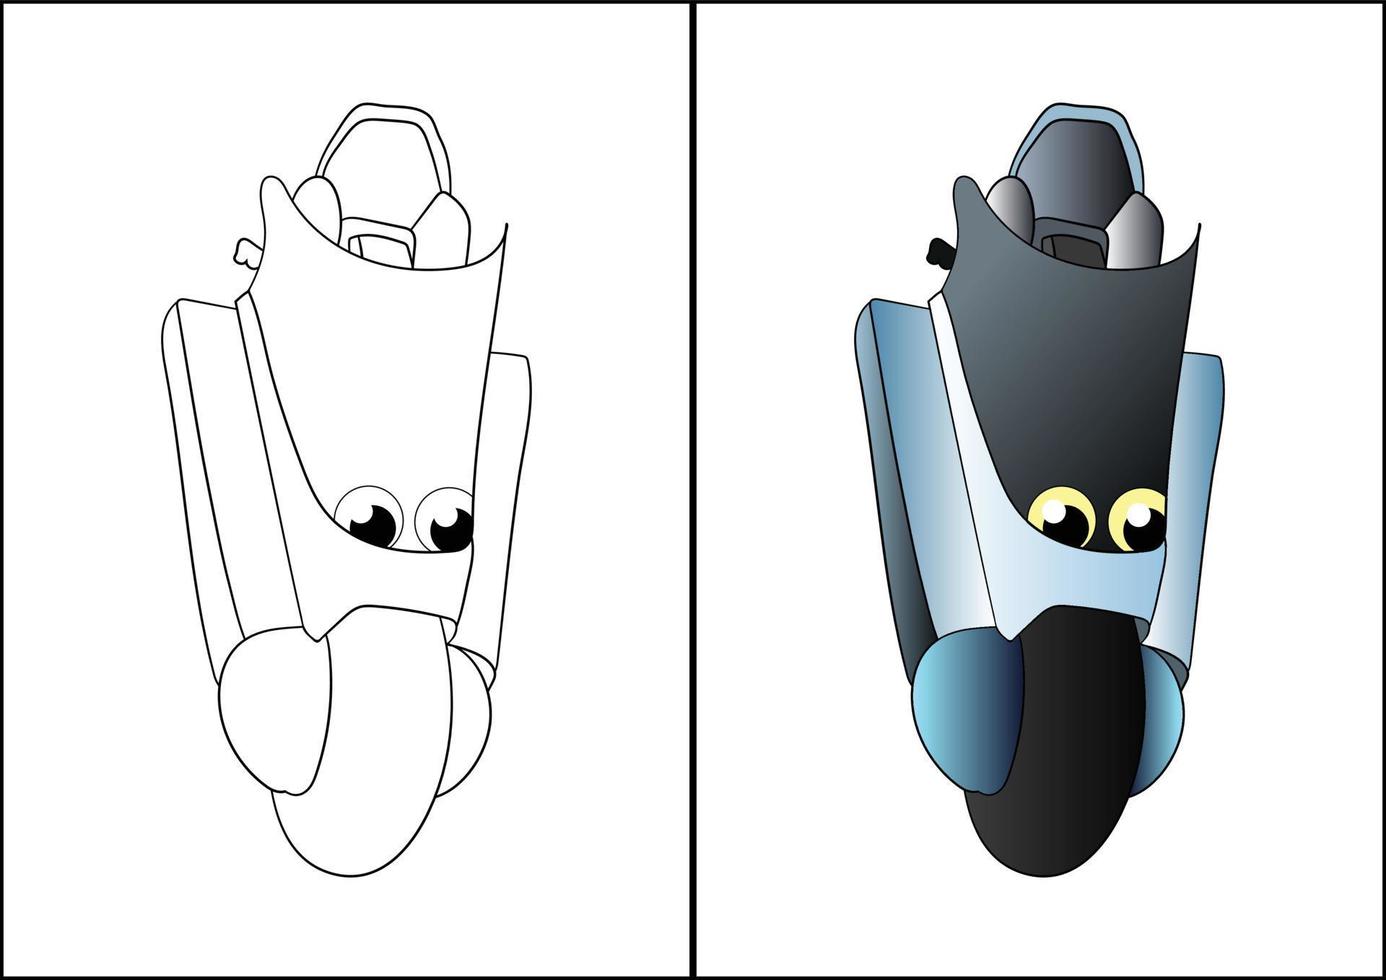 simple vehicle coloring pages for kids, kids coloring pages. vector